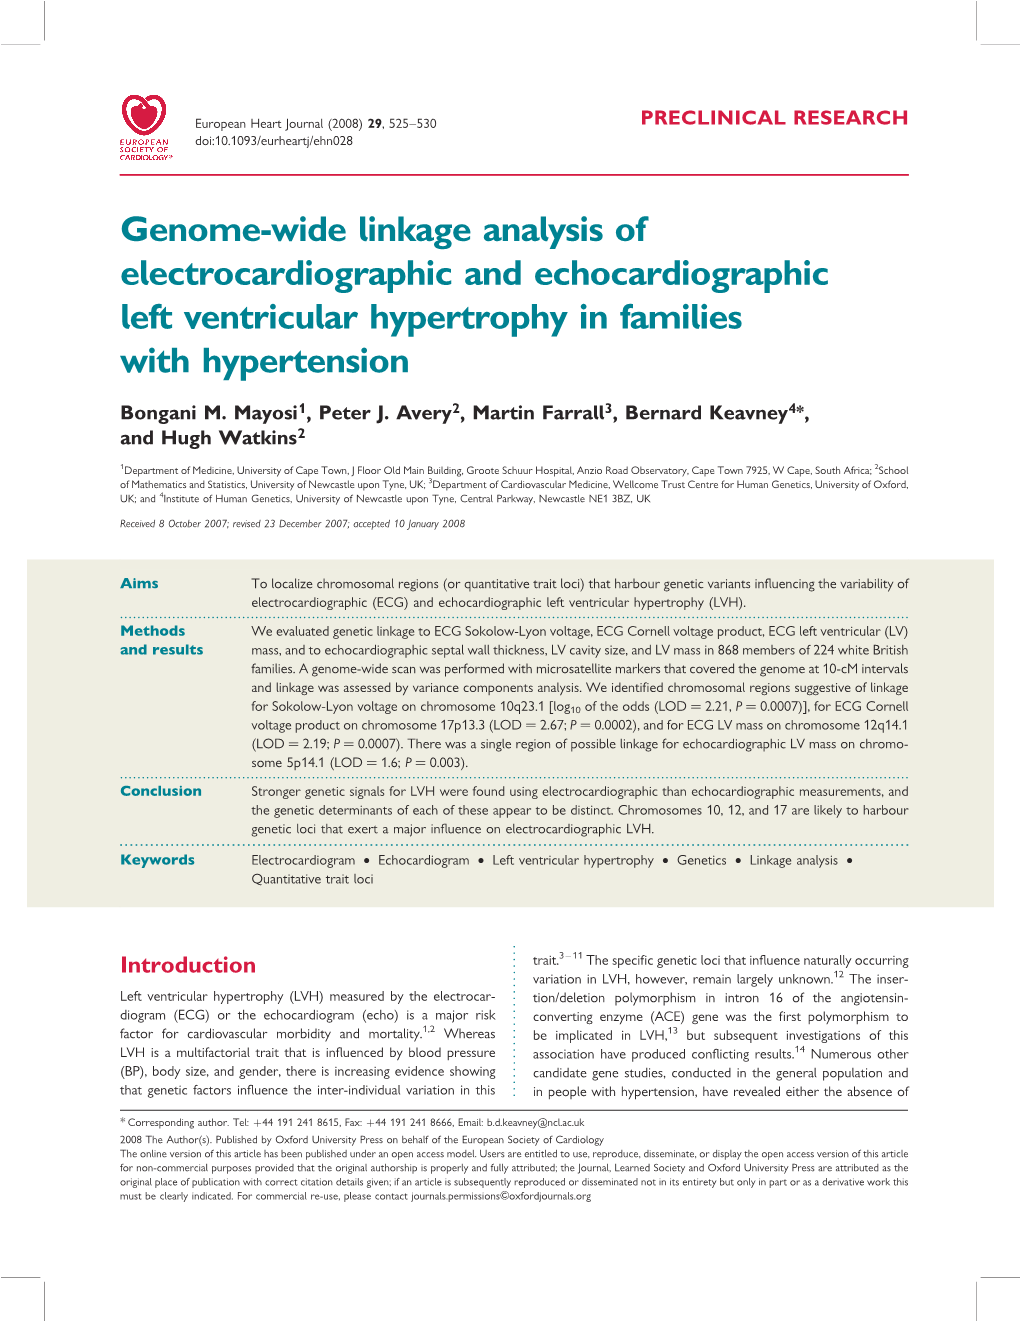 Genome-Wide Linkage Analysis of Electrocardiographic and Echocardiographic Left Ventricular Hypertrophy in Families with Hypertension